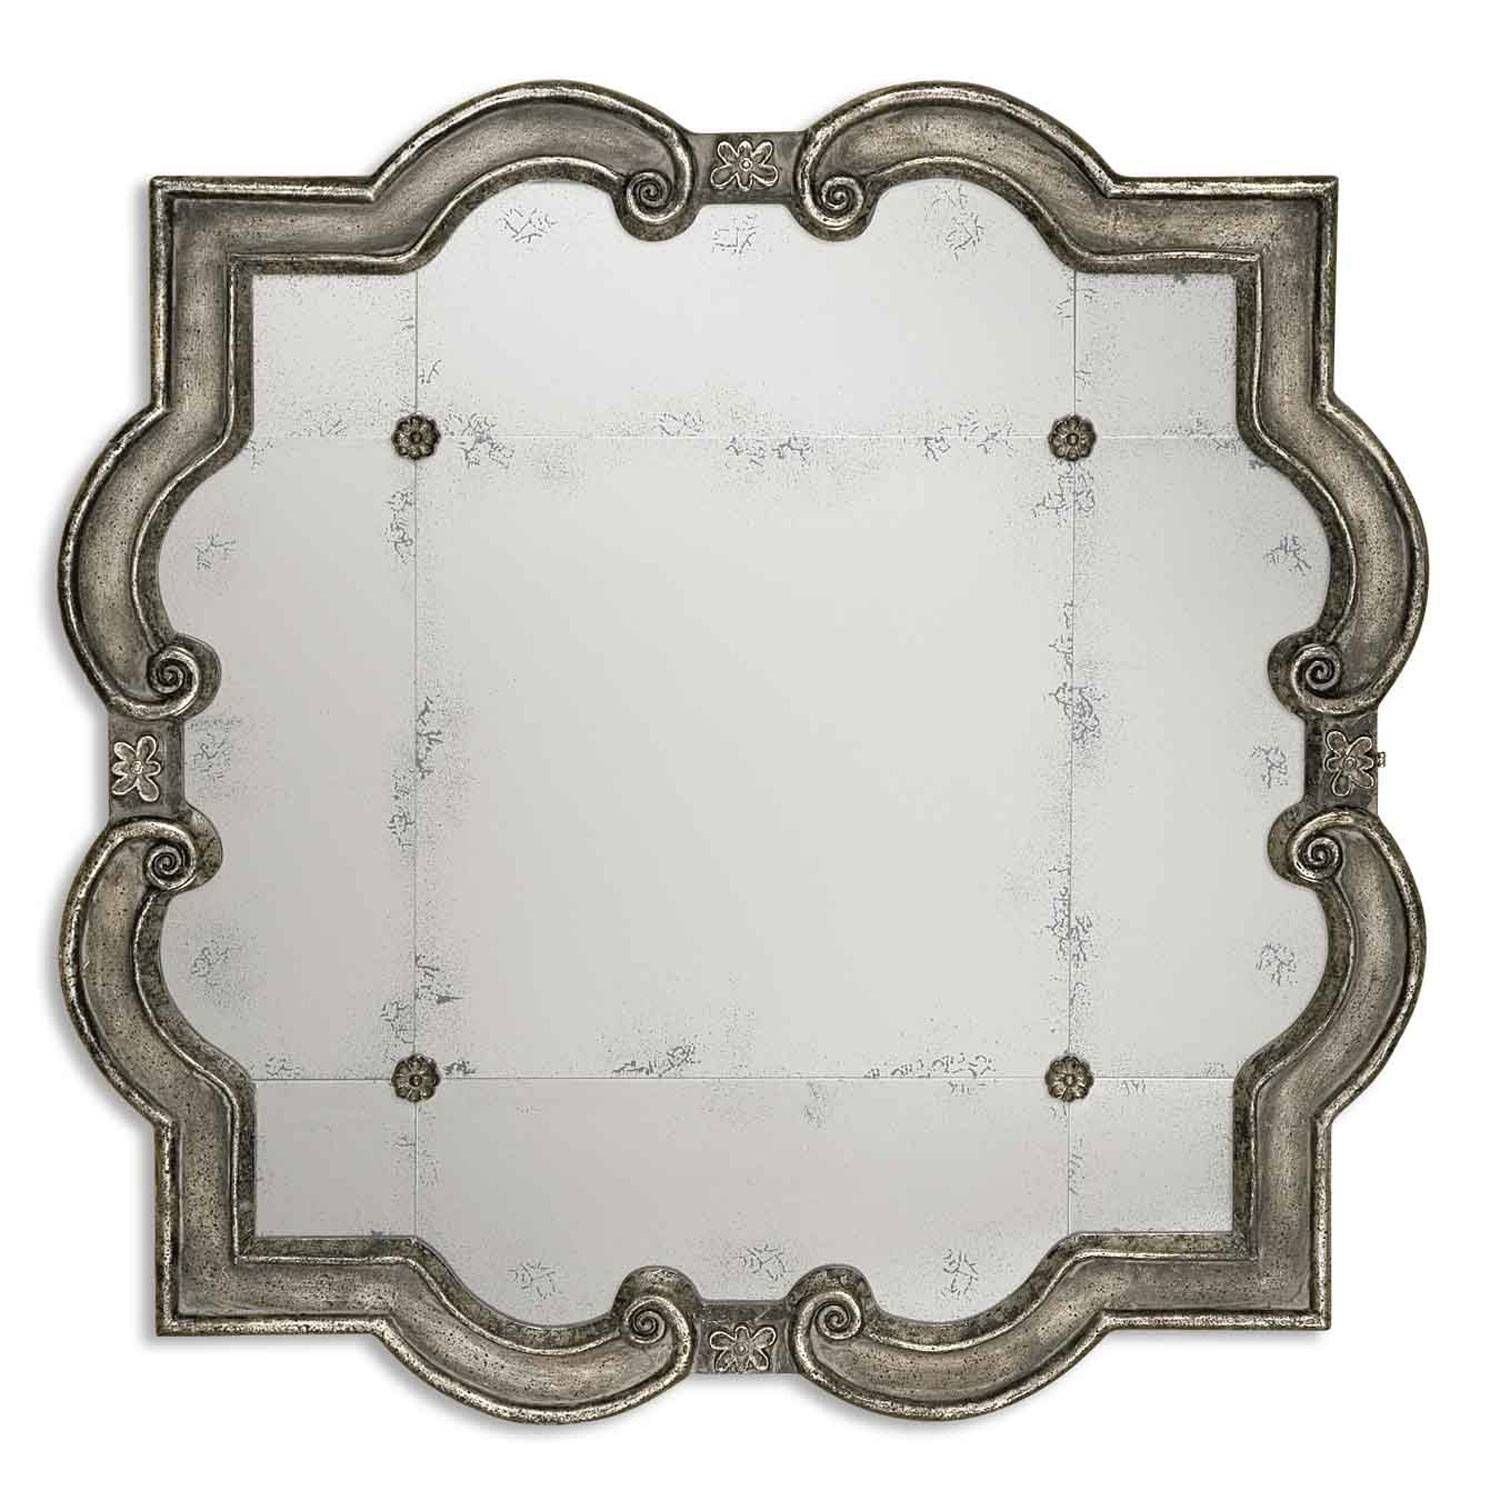 Old World Mirrors | Bellacor With Regard To Small Ornate Mirrors (View 4 of 25)